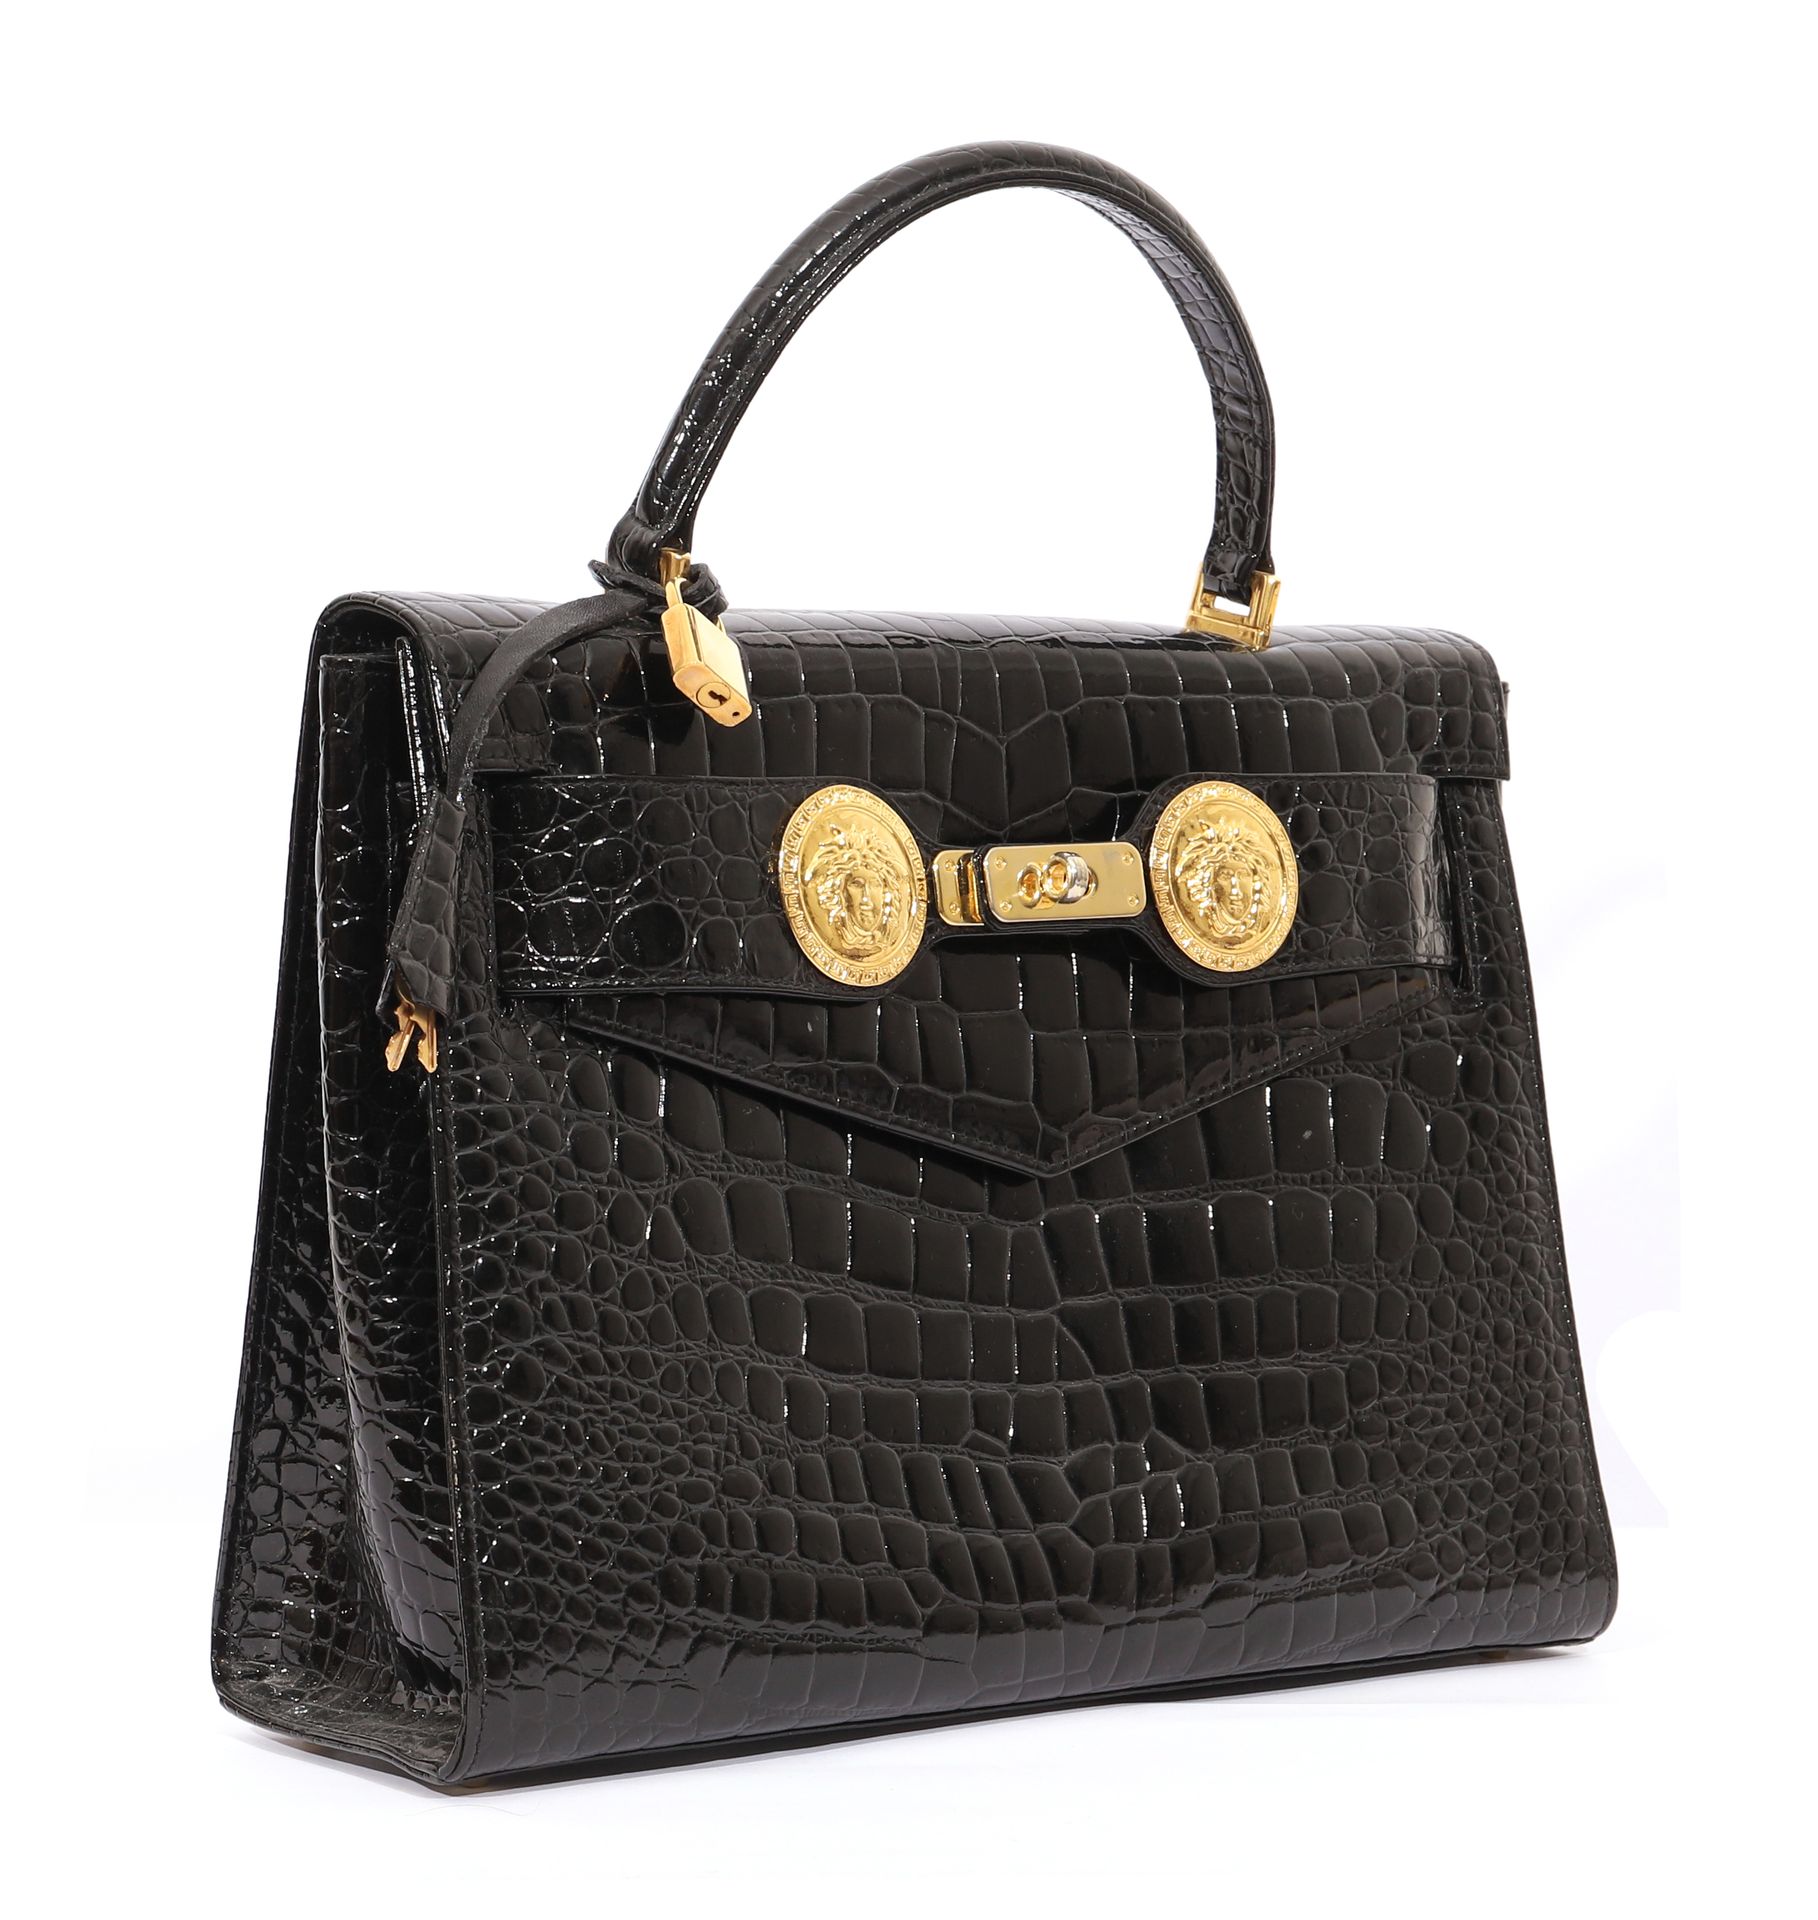 Null Versace

Bag in imitation crocodile leather. Model inspired by the Kelly by&hellip;